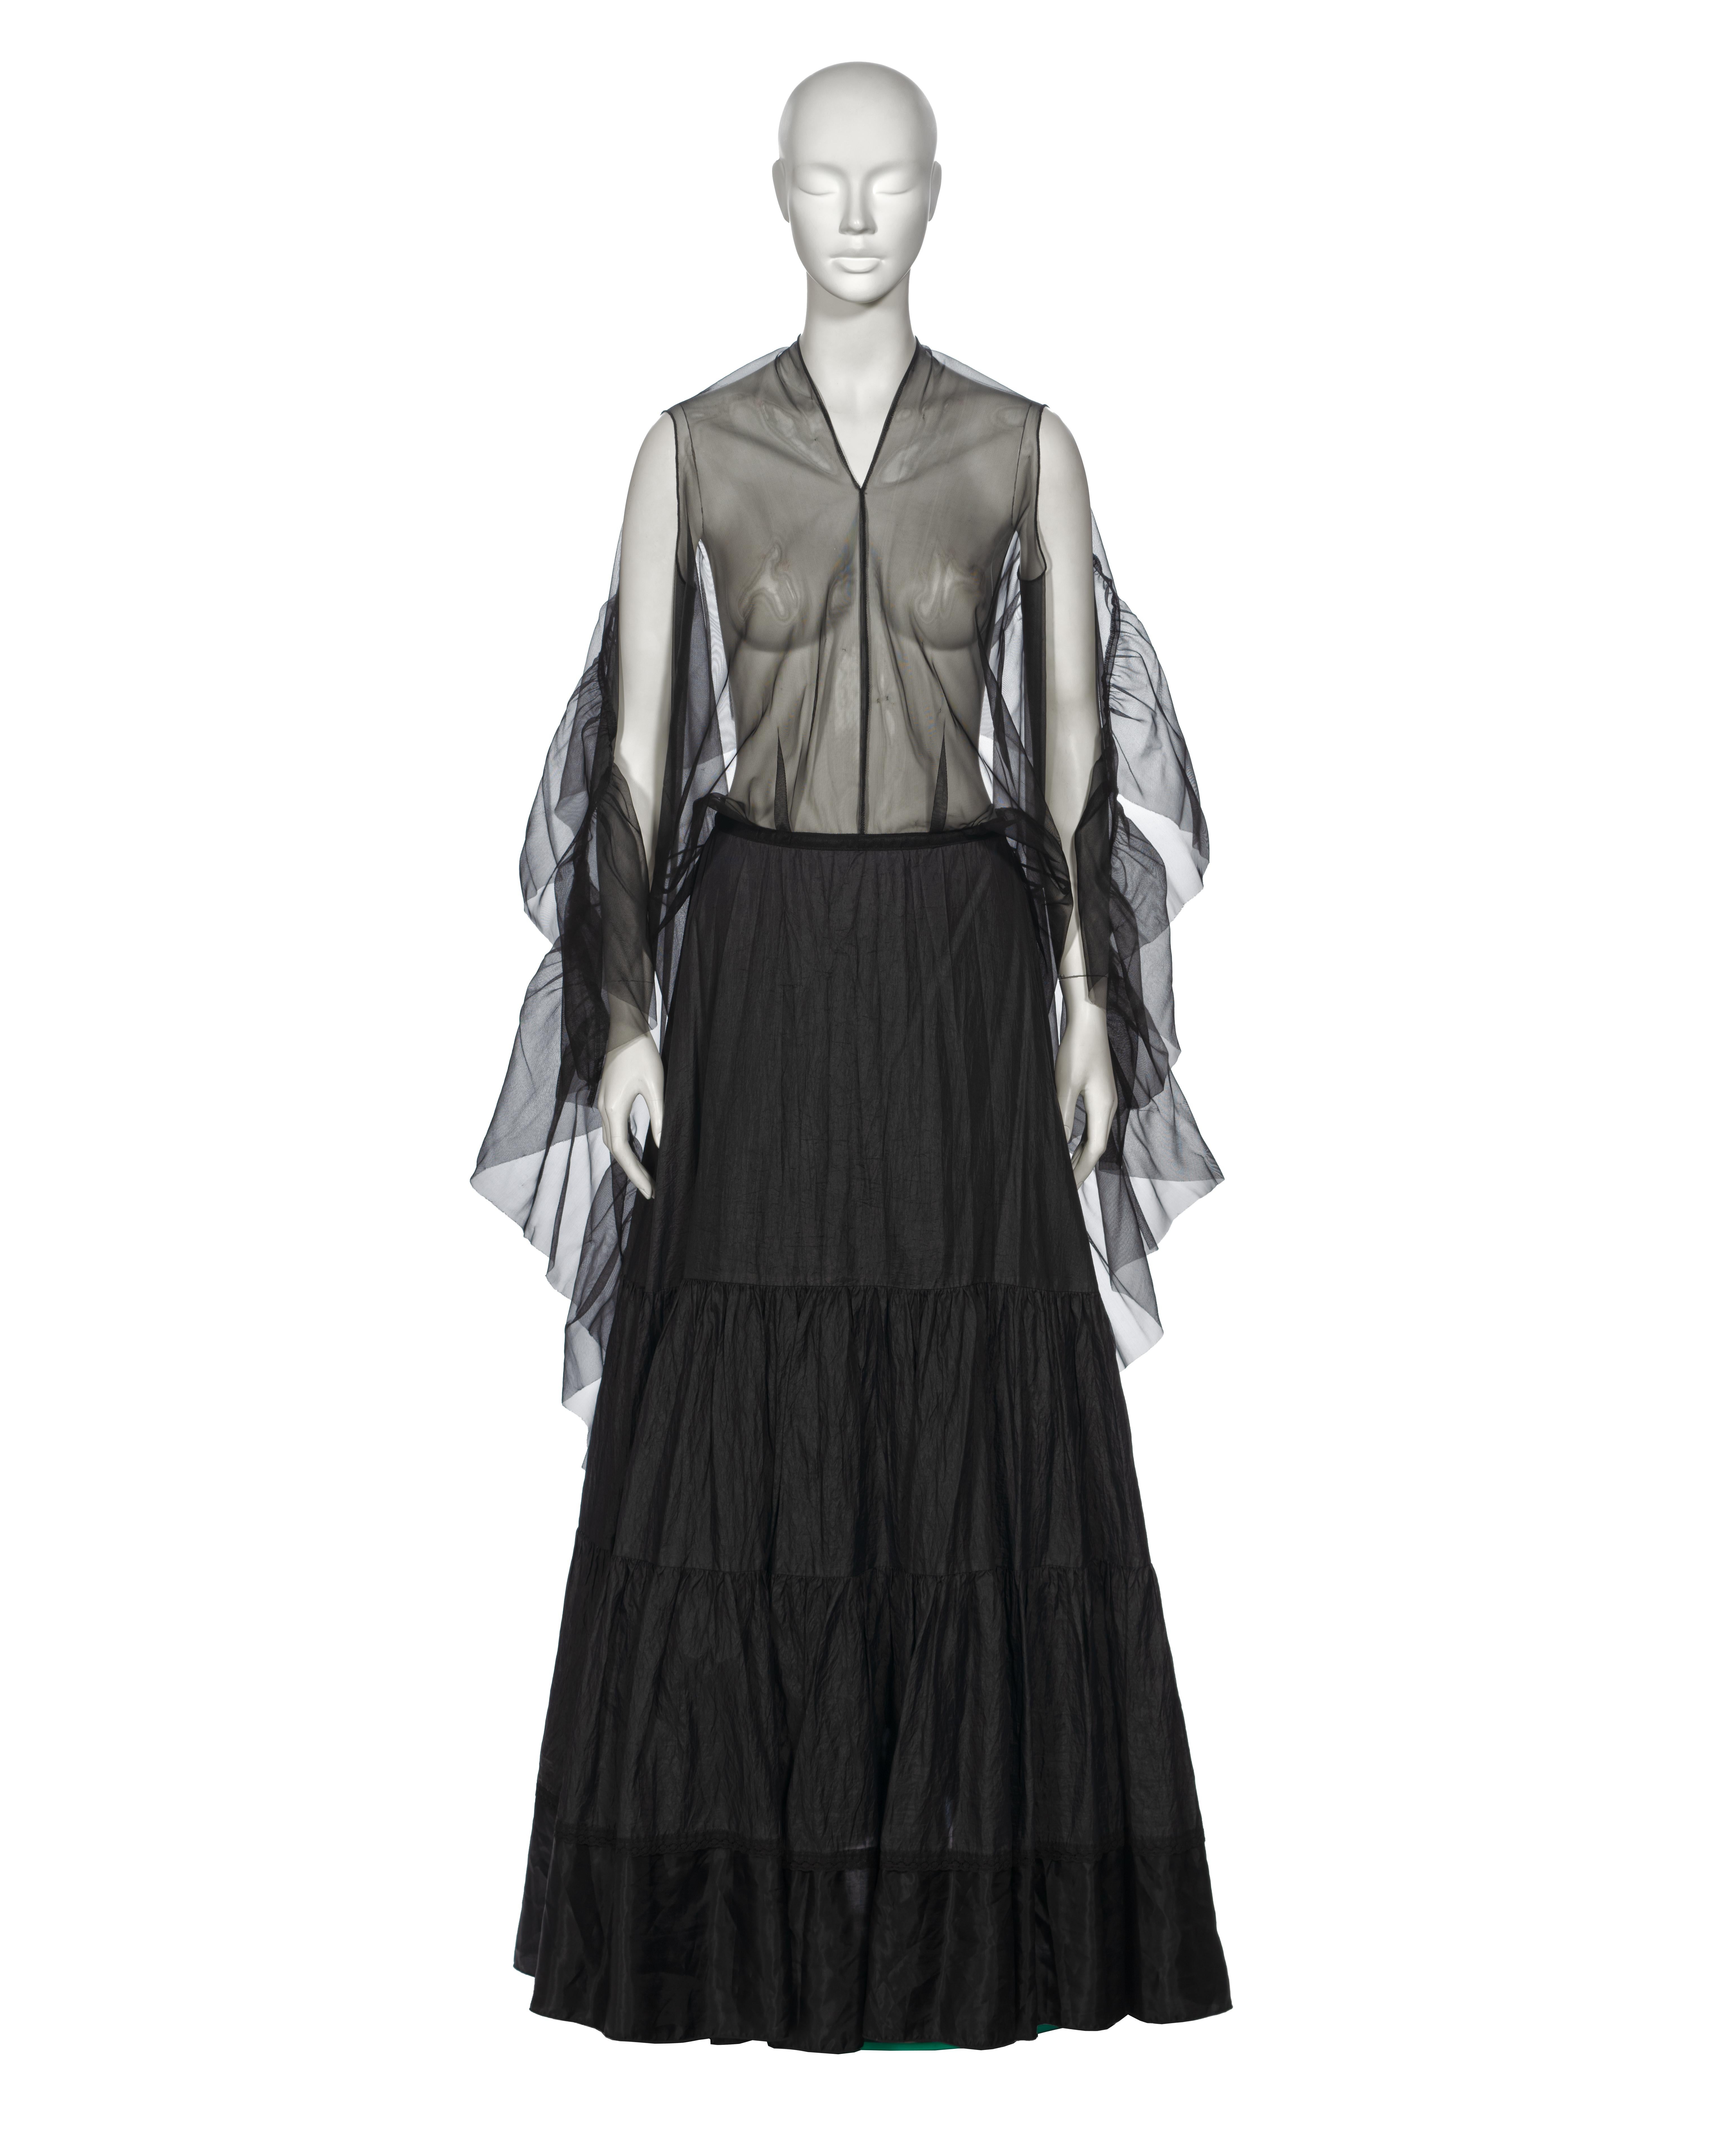 ▪ Archival Margiela Evening Dress
▪ Creative Director: Martin Margiela 
▪ Spring-Summer 2003
▪ Sold by One of a Kind Archive
▪ Museum Grade 
▪ Constructed from repurposed vintage petticoats
▪ The outer skirt showcases tiered pleated panels in